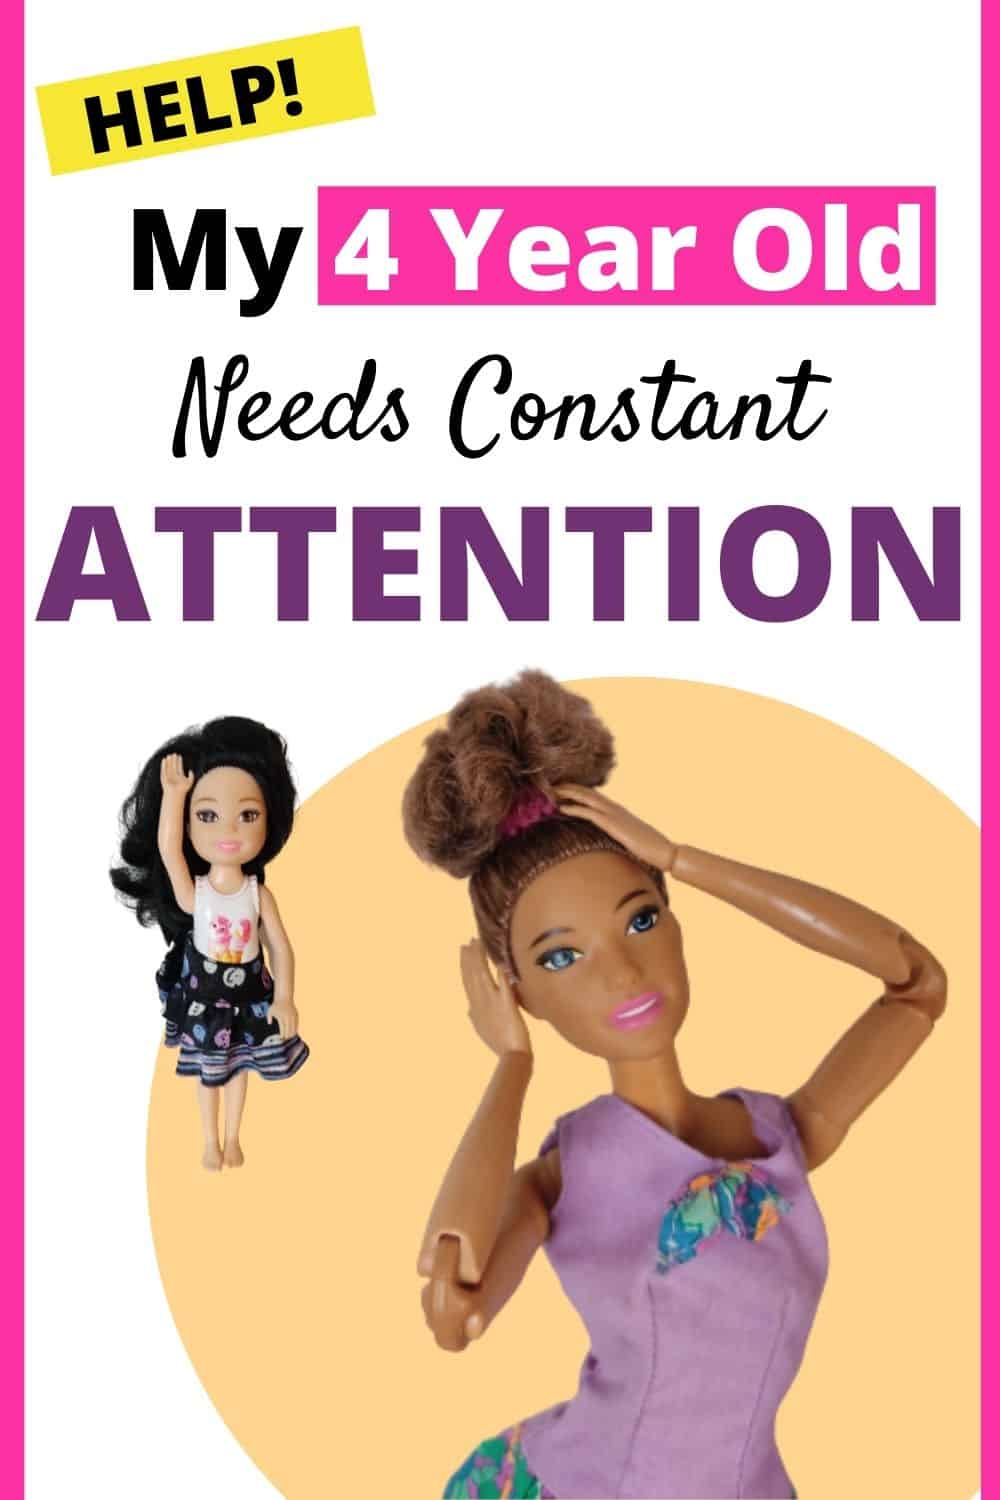 "Help my 4 year old needs constant attention" with Barbie mom and daughter